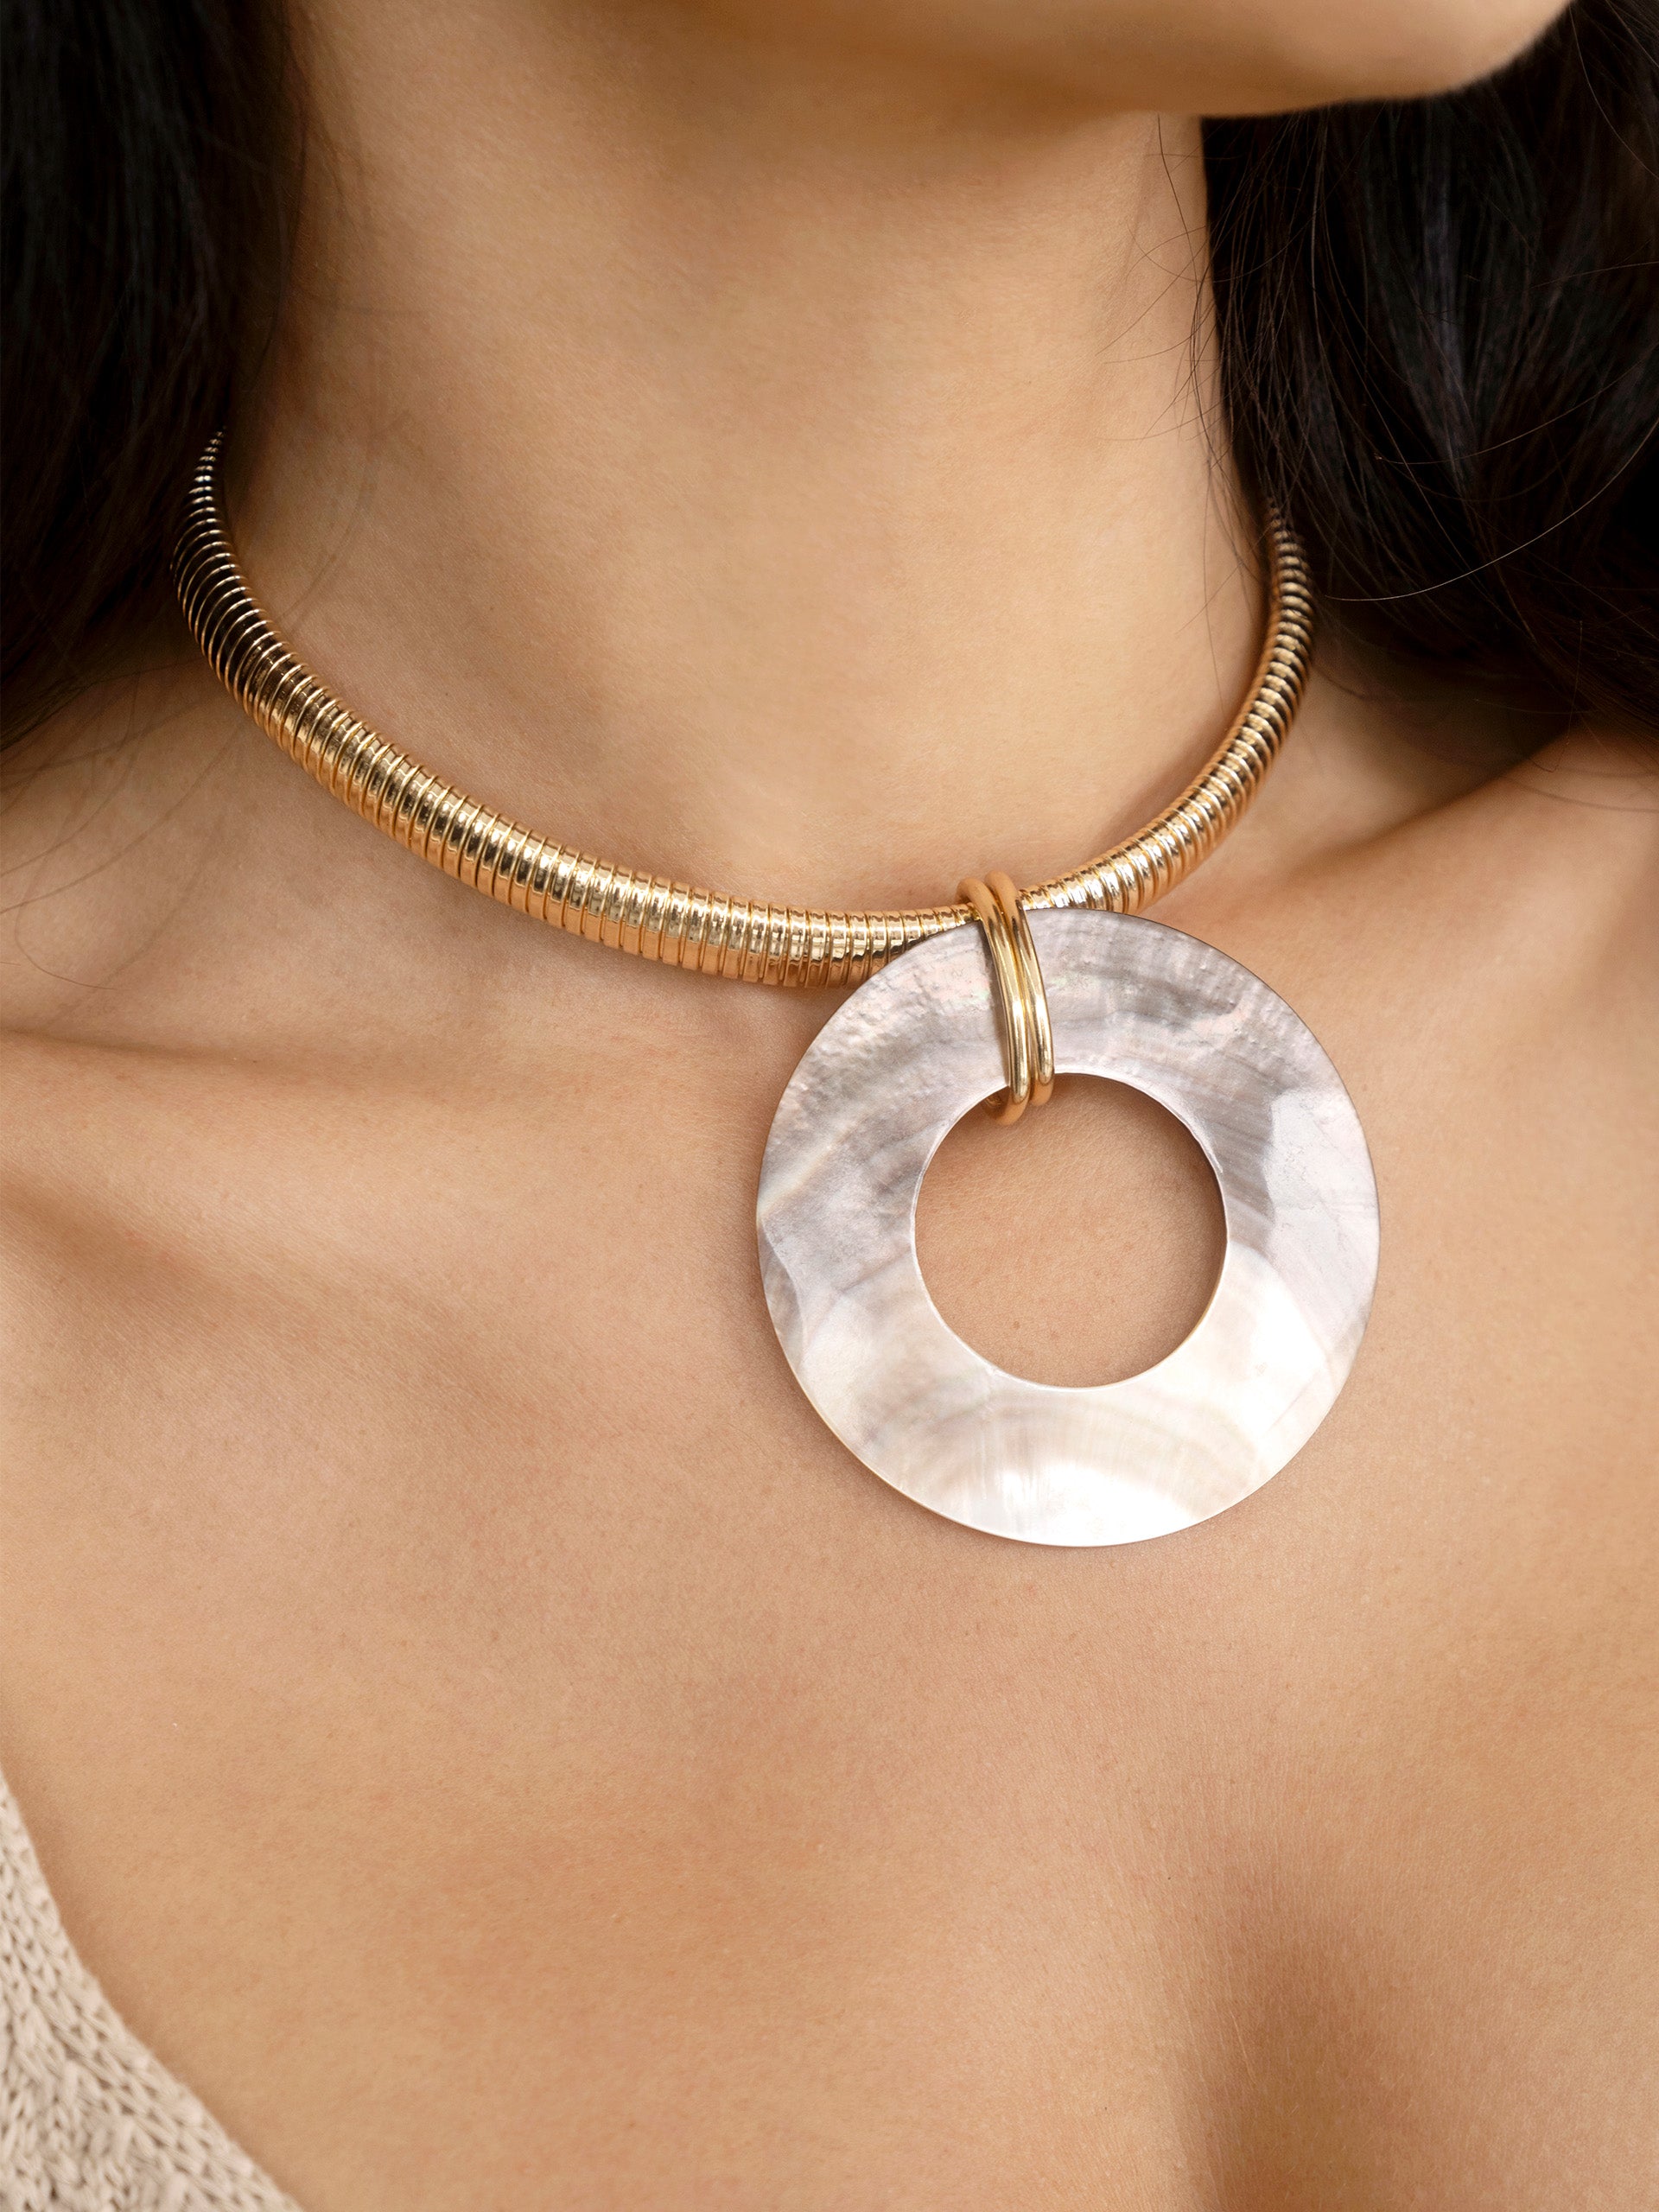 Shell Open Circle Pendant Flex Chain Necklace on model